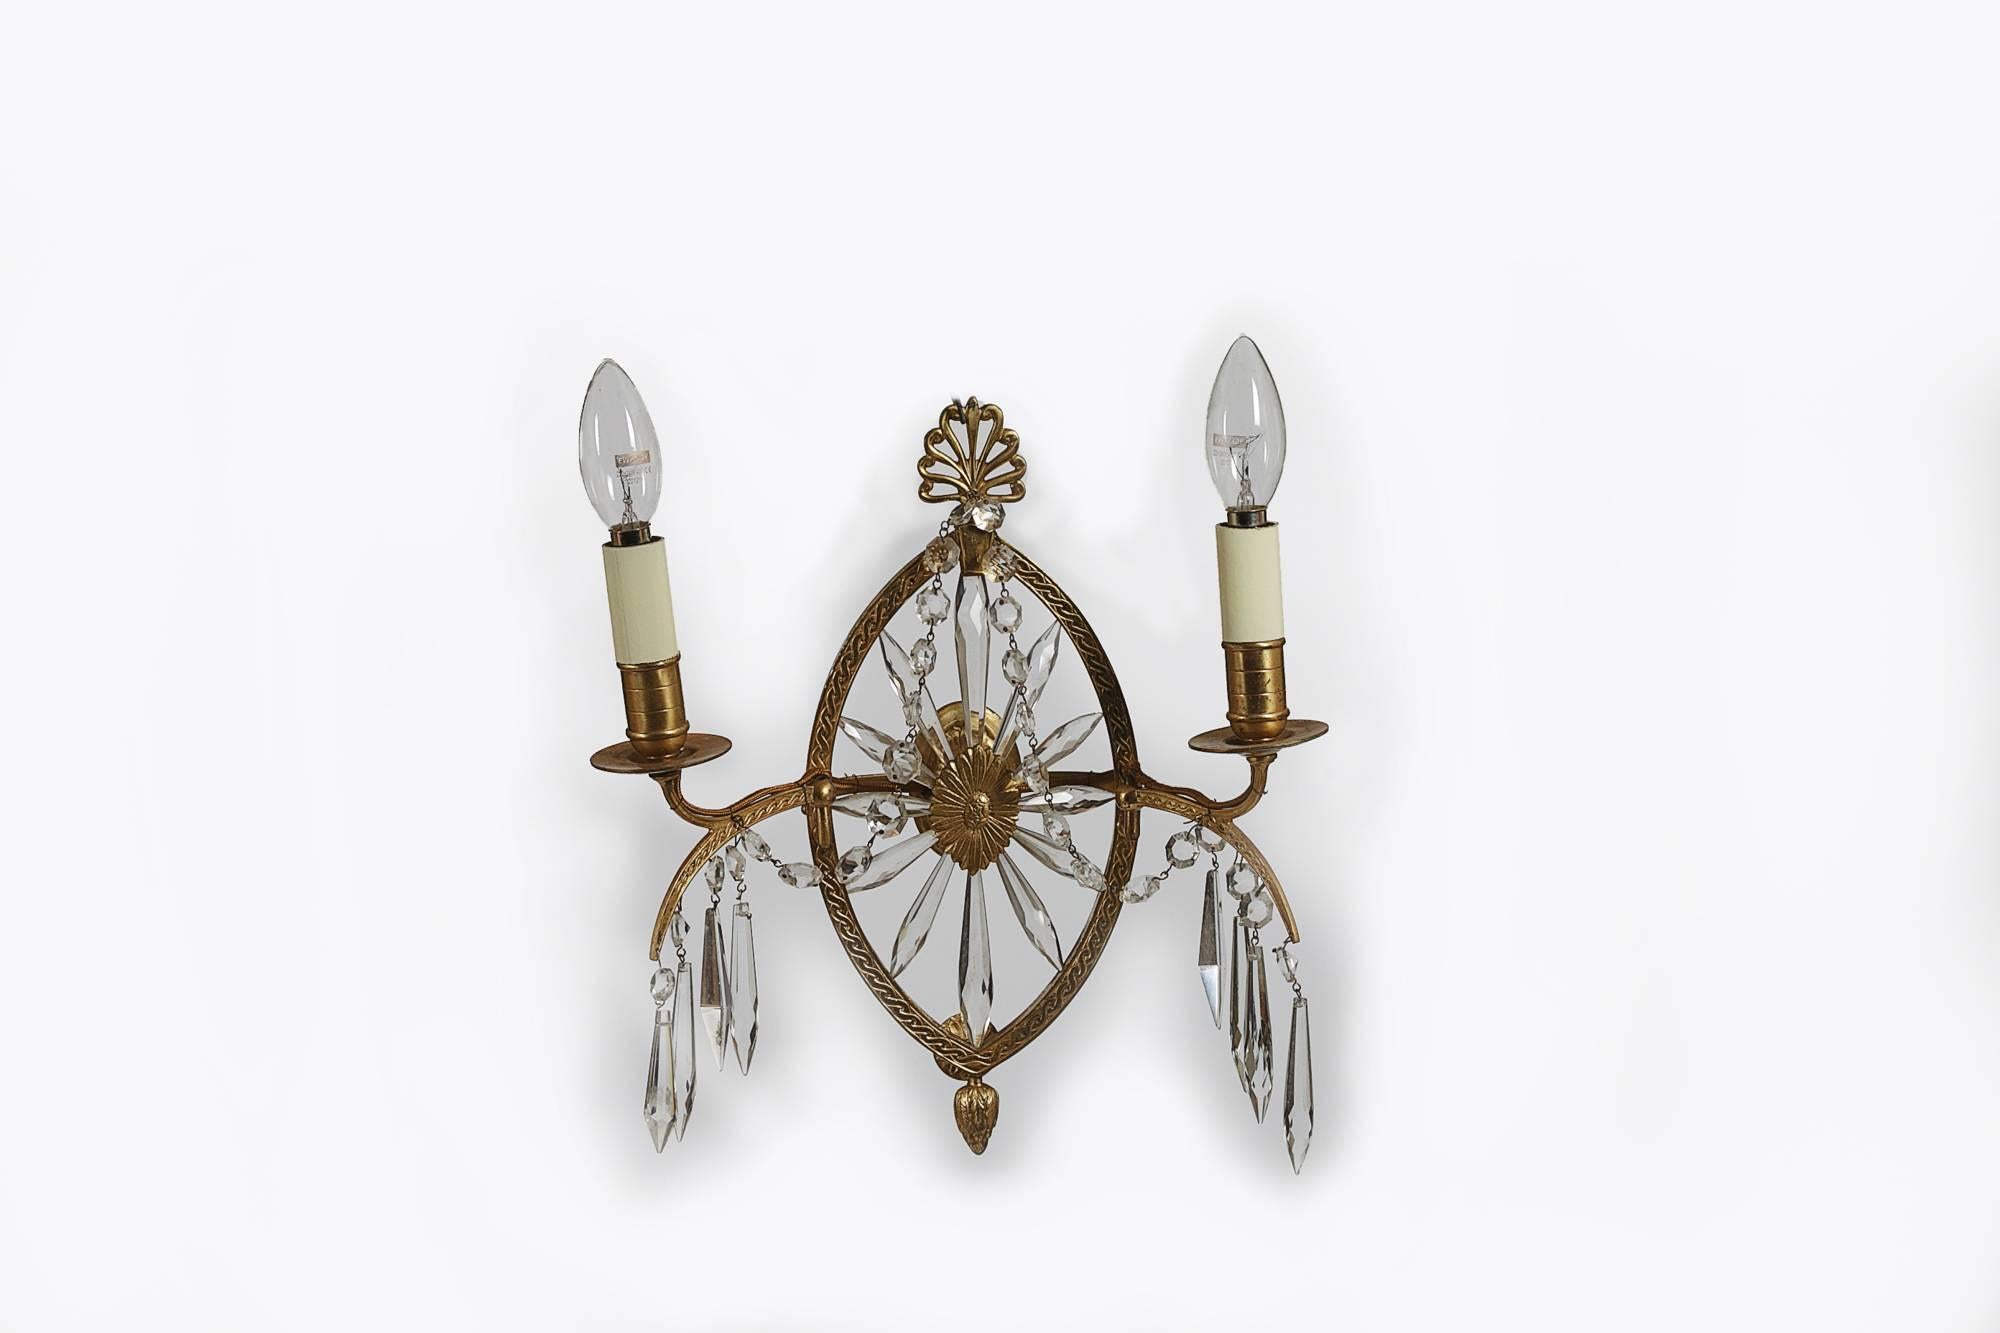 Early 19th century Regency set of four glass and gilt metal wall lights, electrified. Each central frame surrounding a glass sunburst, with an anthemion crown and acorn finial, with pairs of arms and glass drops.